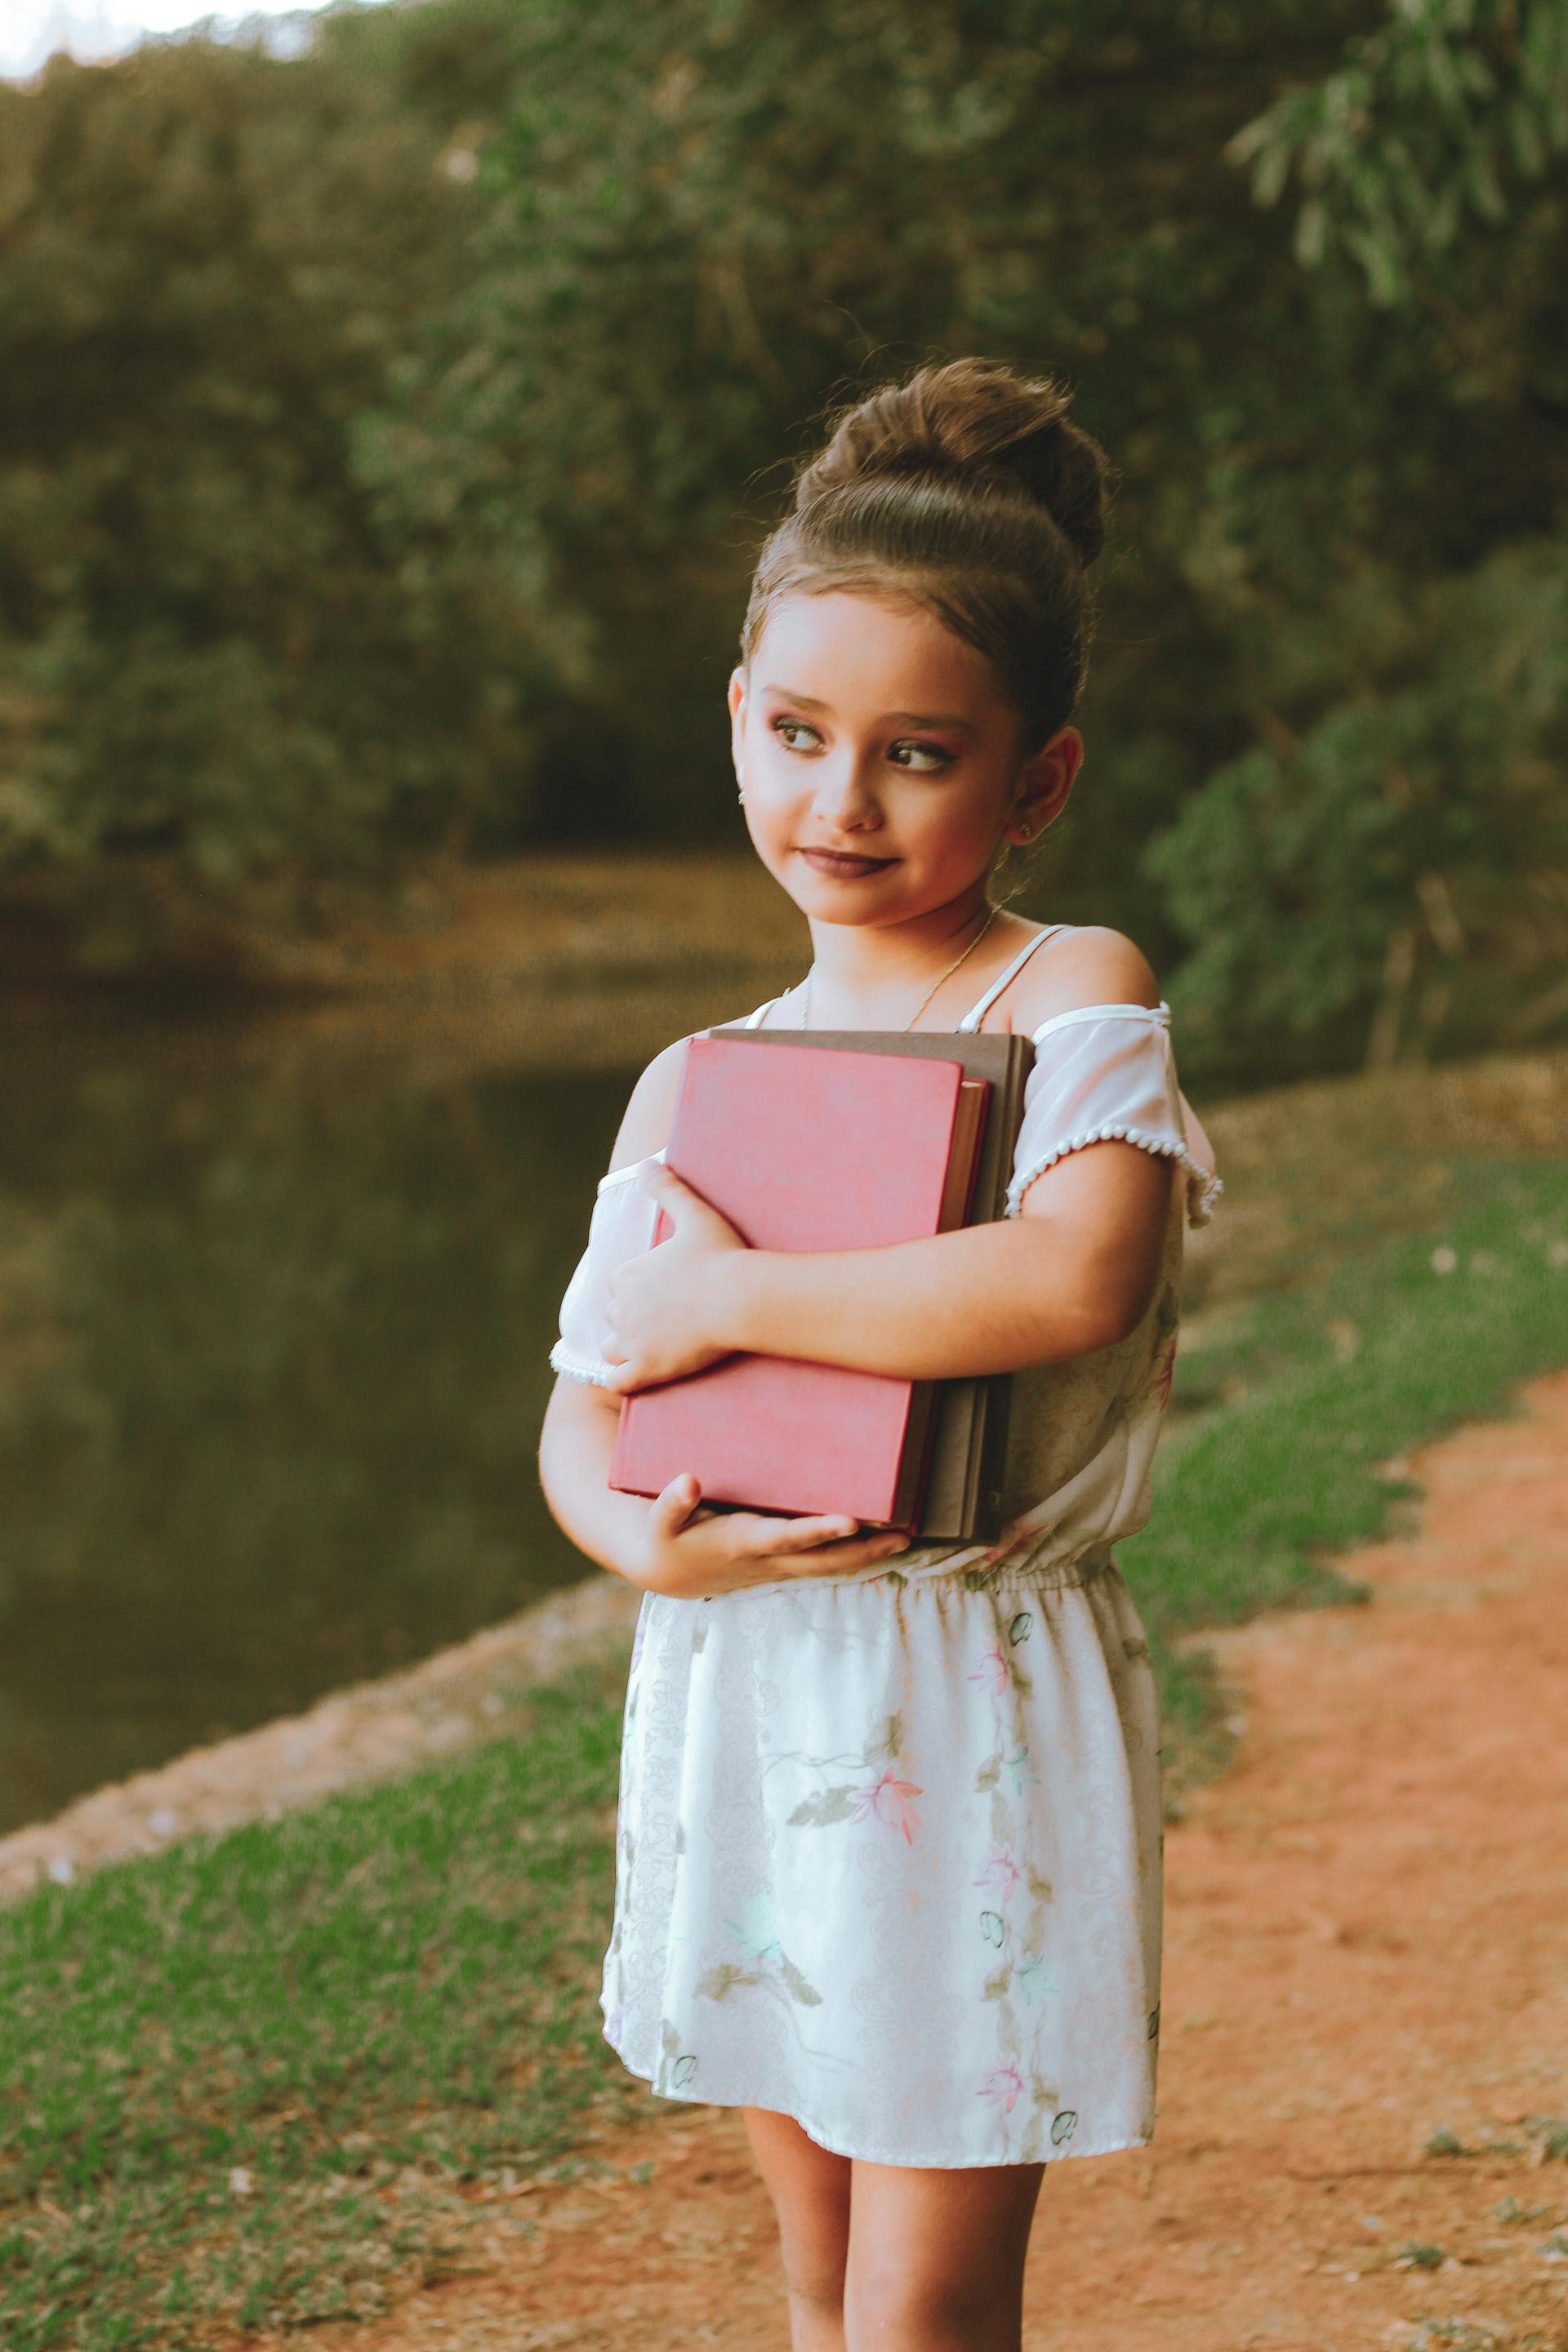 A little girl carrying books | Source: Pexels